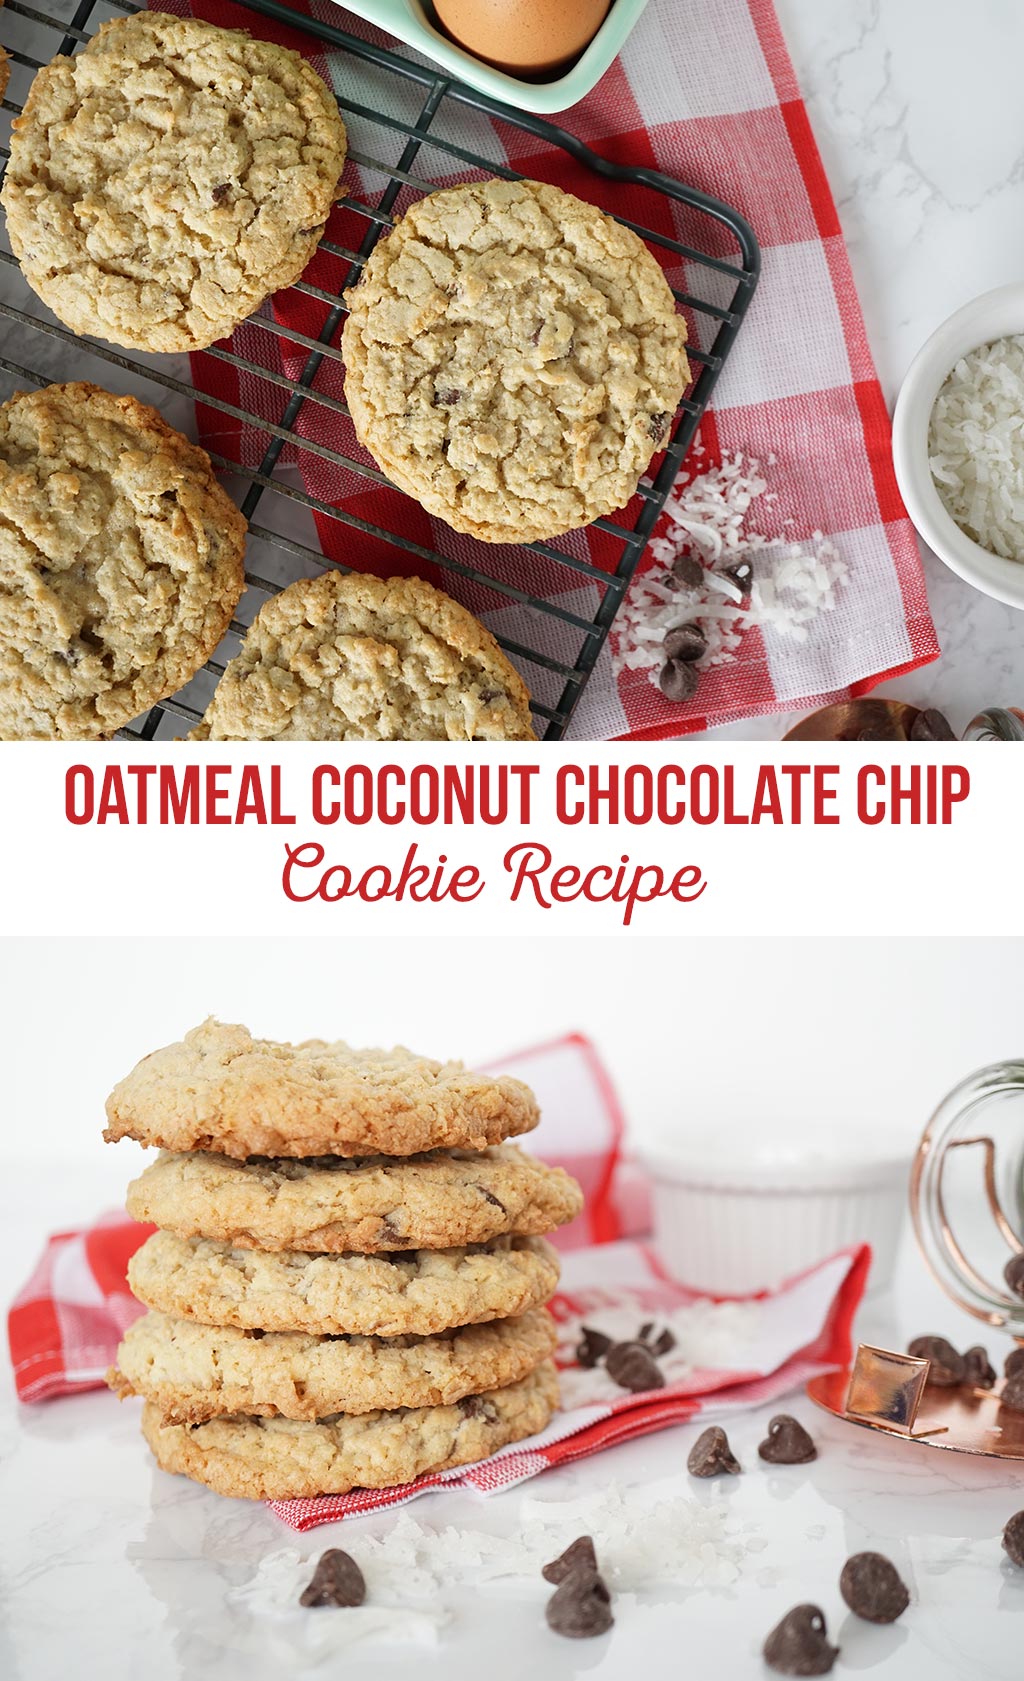 oatmeal coconut chocolate chip cookie recipe